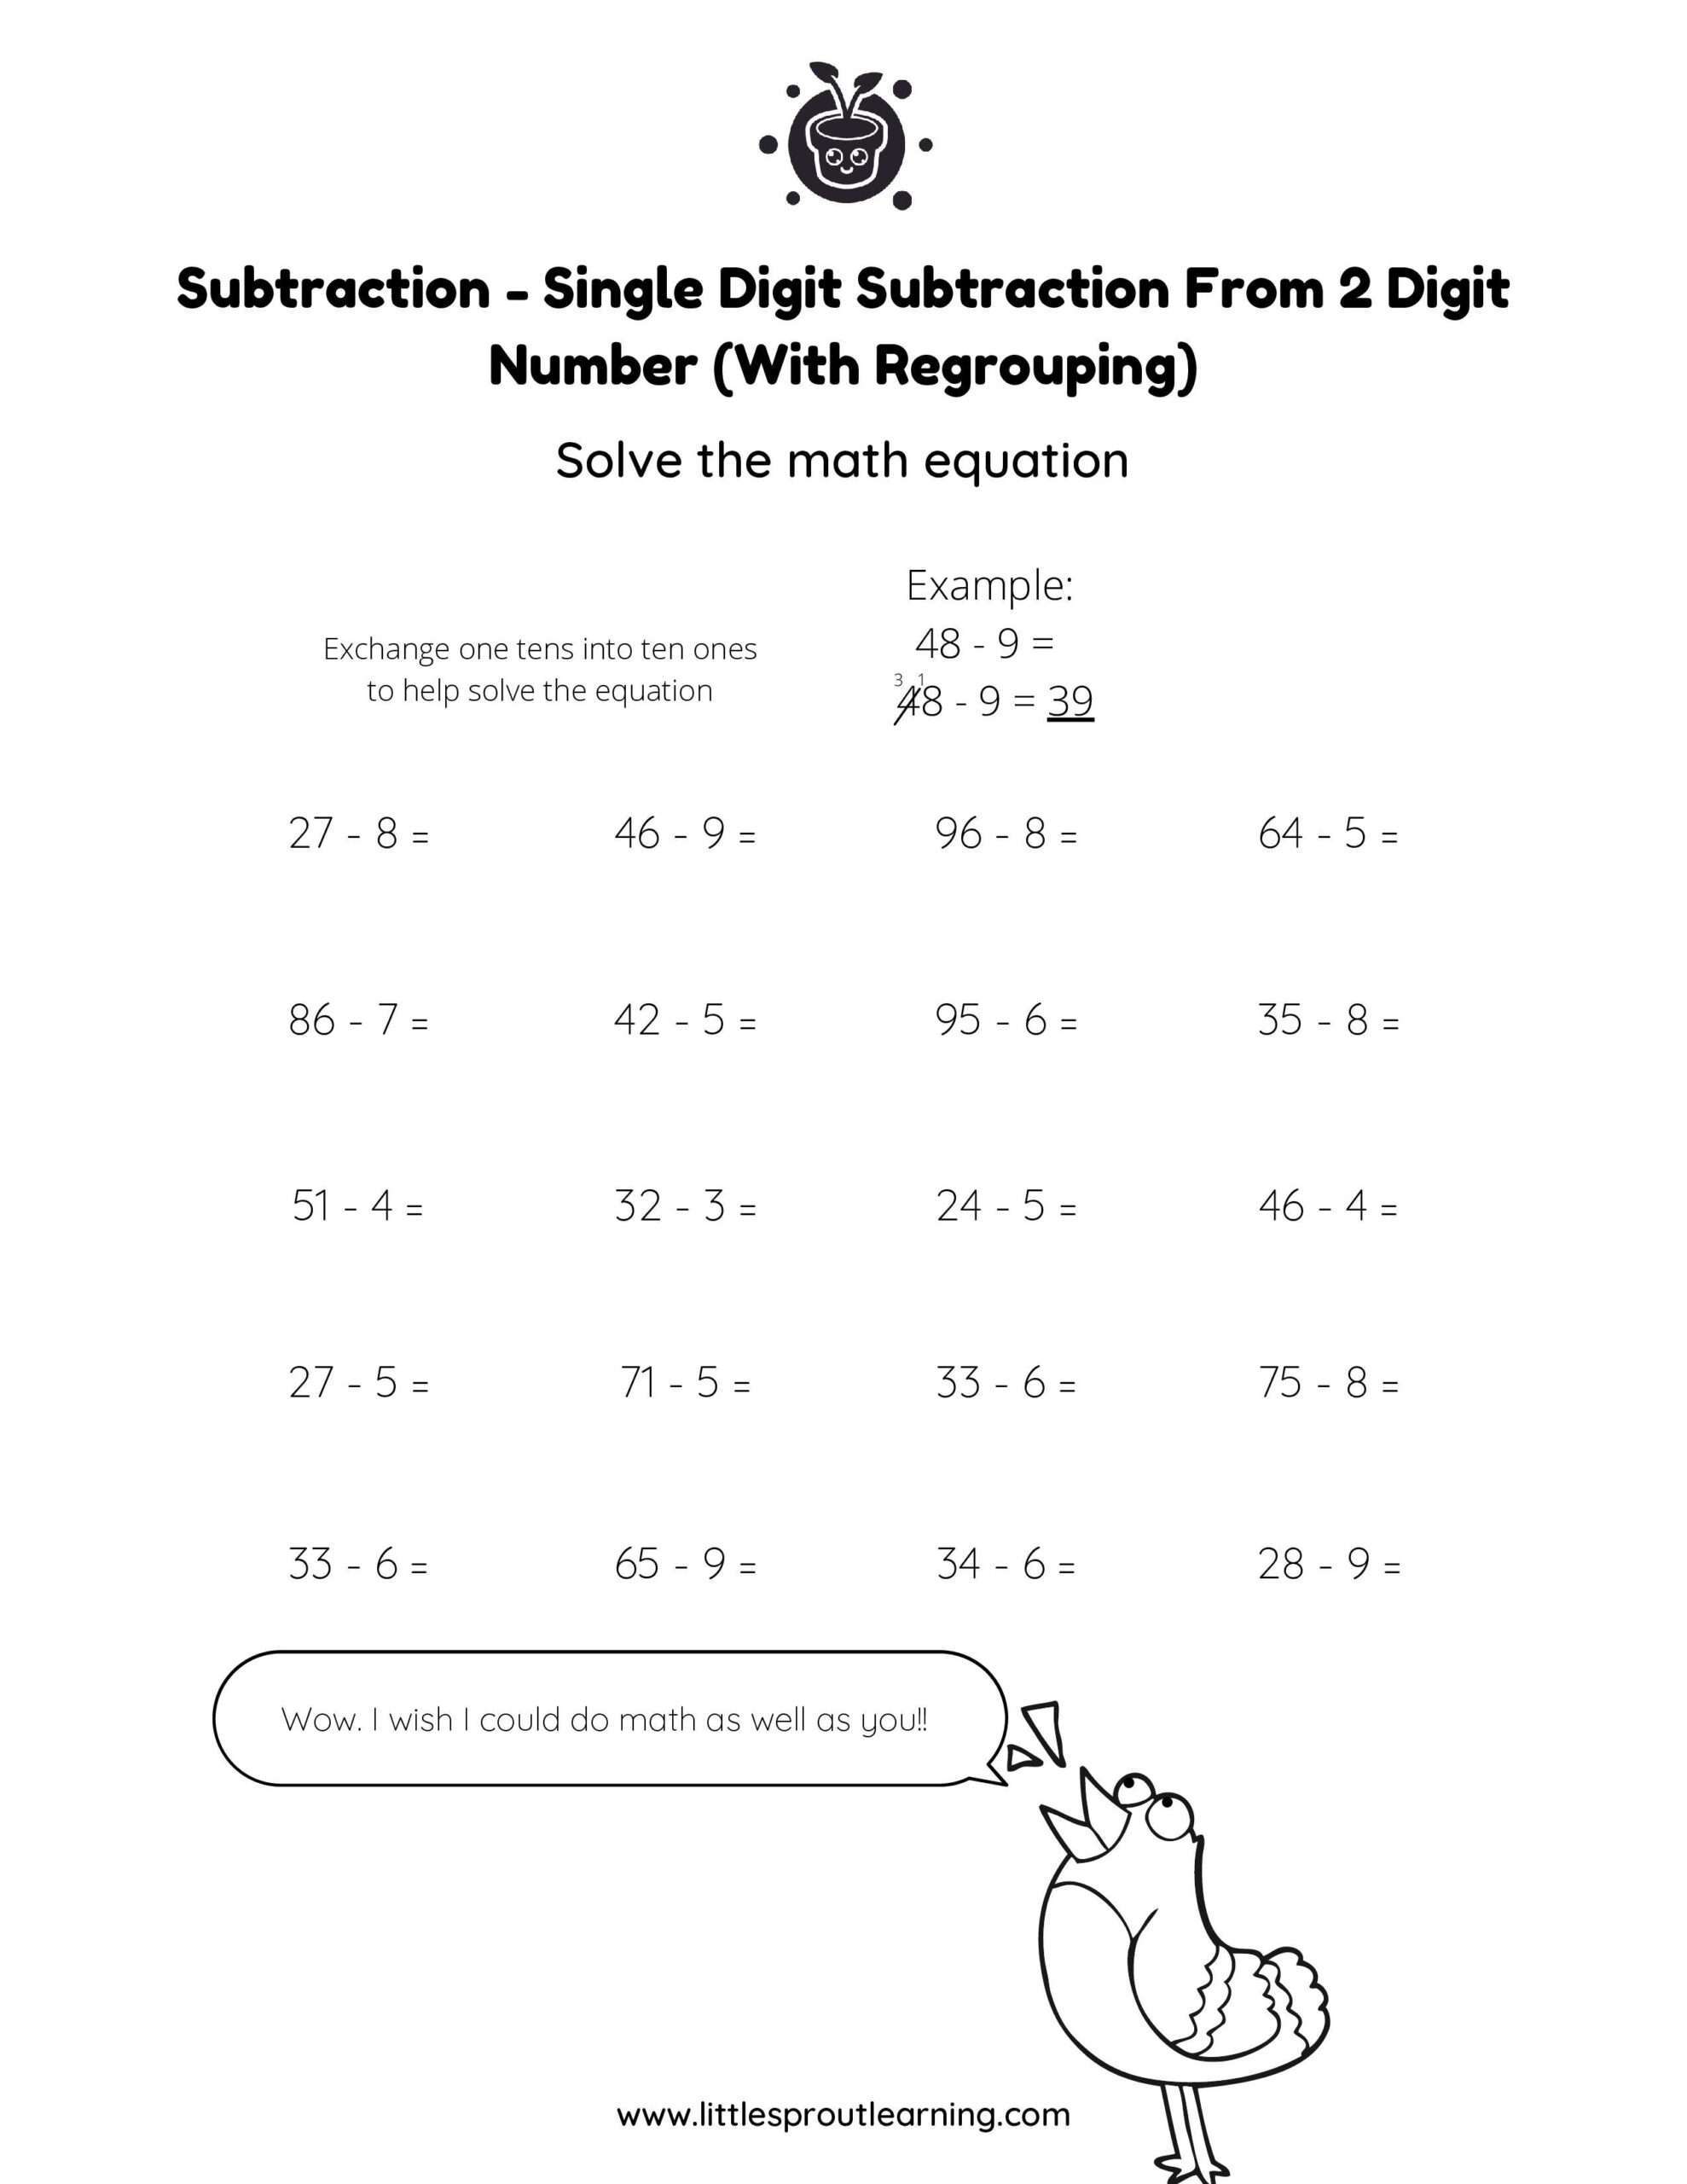 Grade 2 Subtraction Worksheet Single Digit Subtraction From 2 Digit With Regrouping scaled